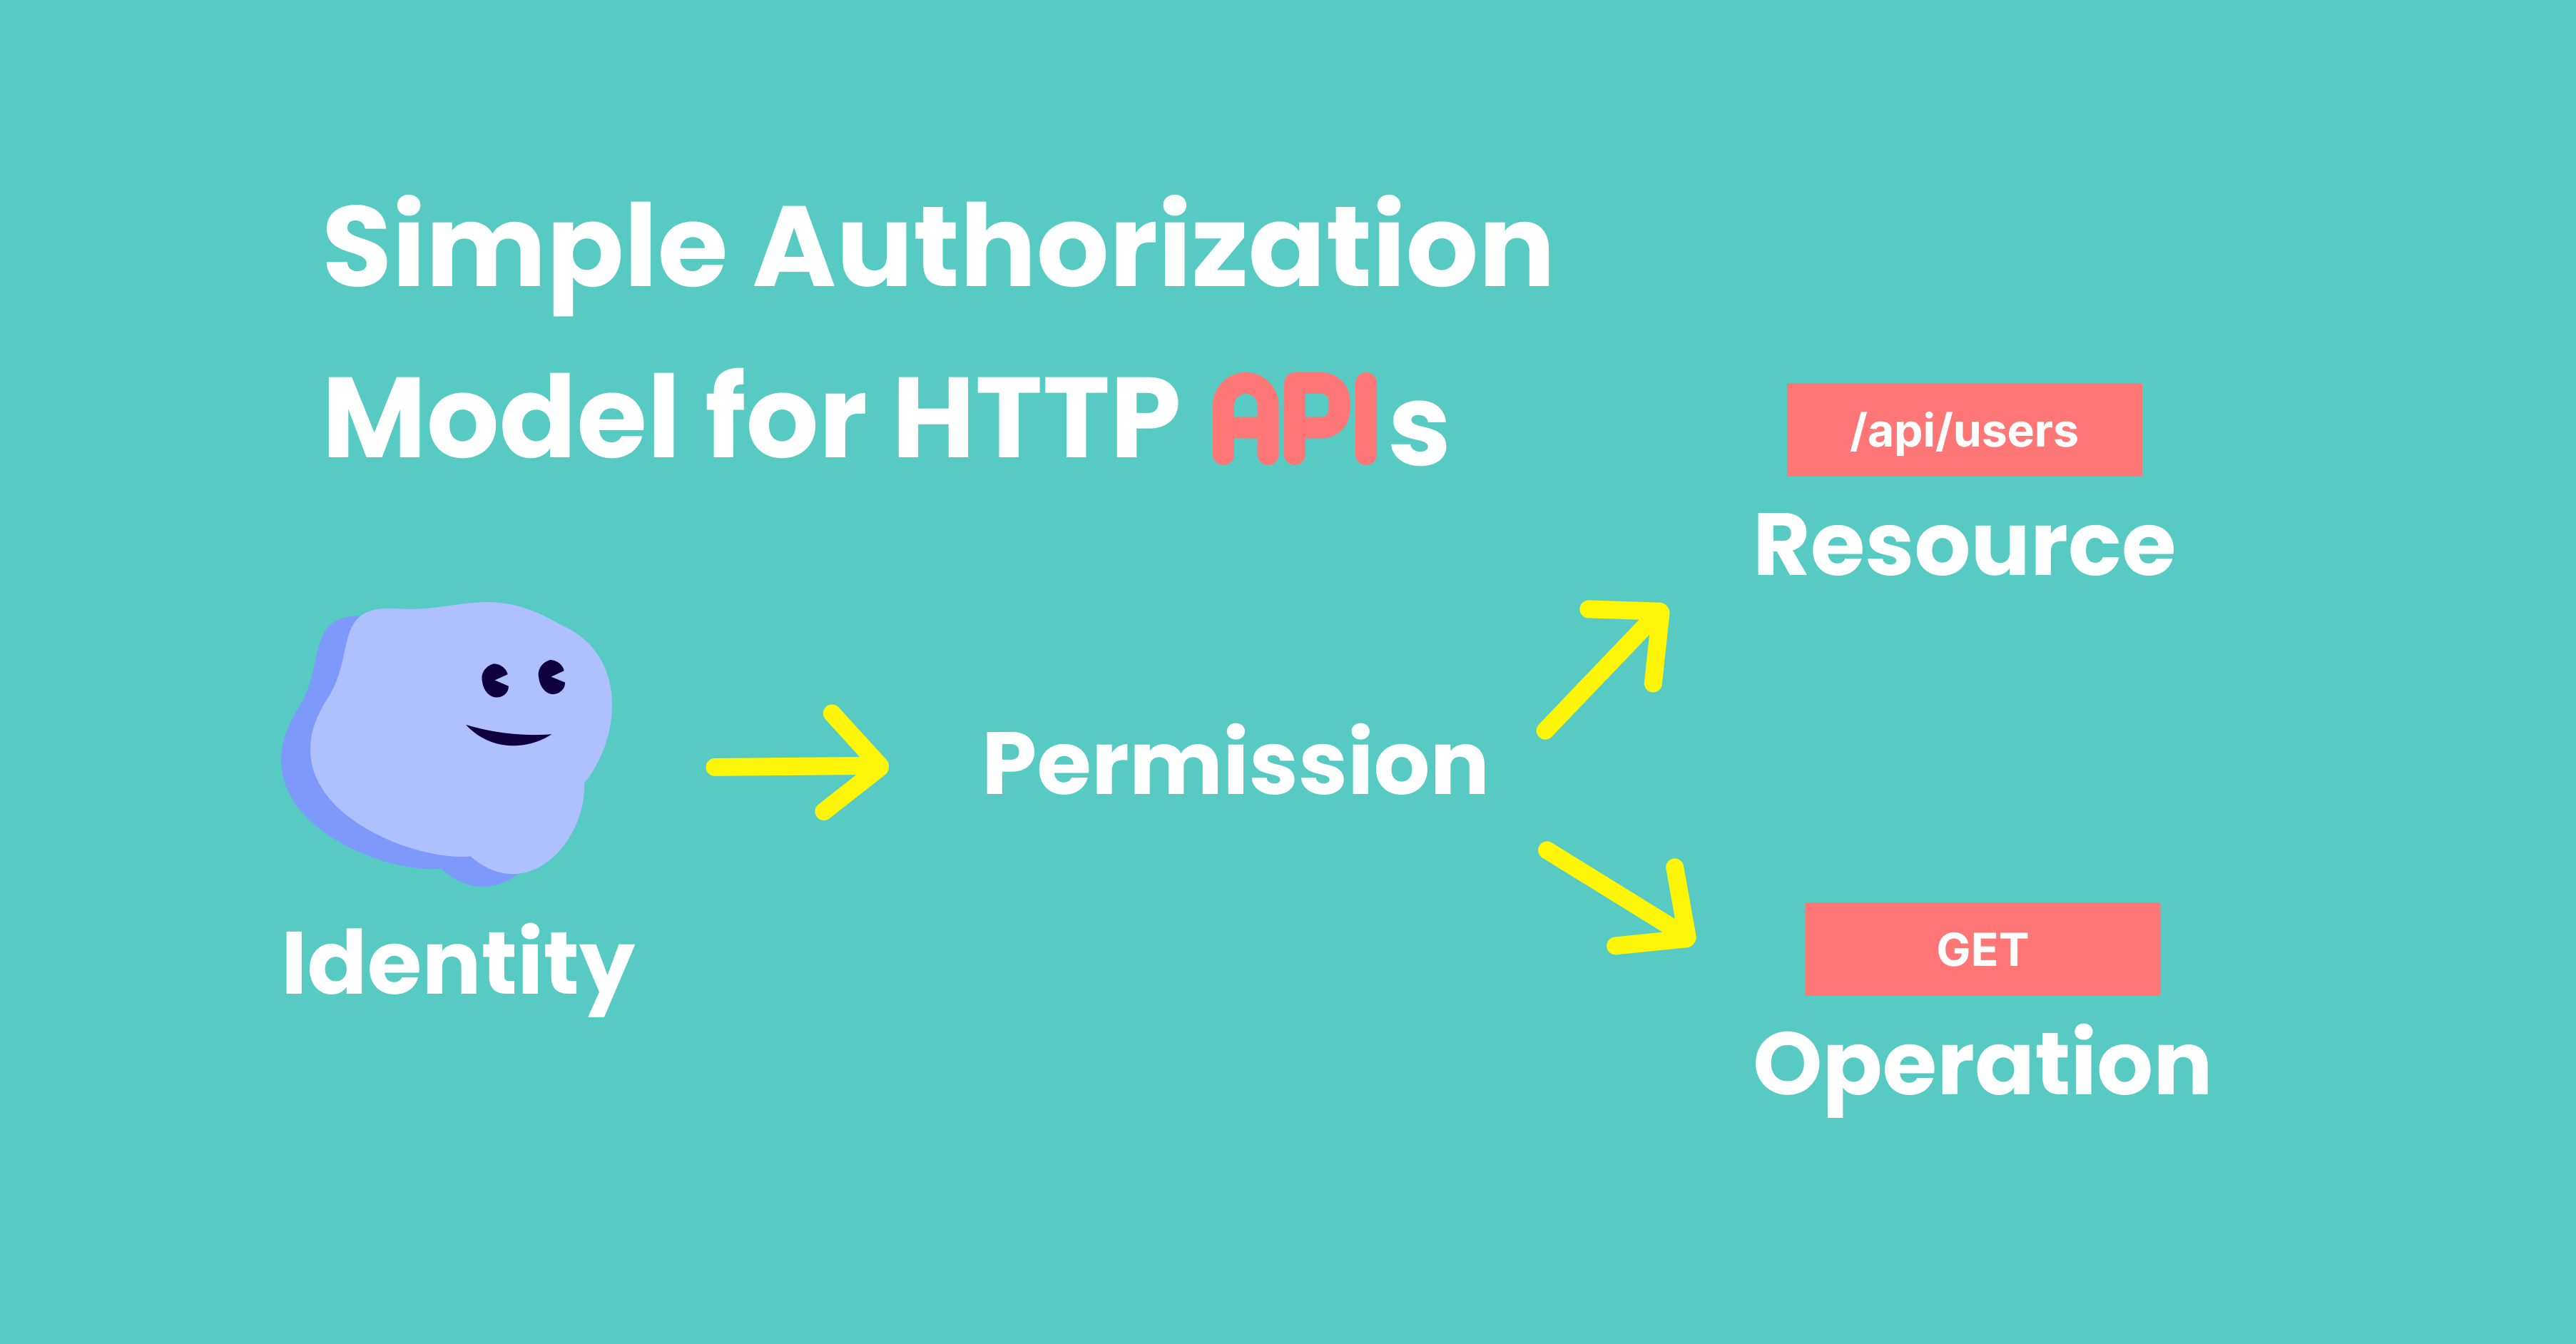 Simple Authorization Model for HTTP APIs